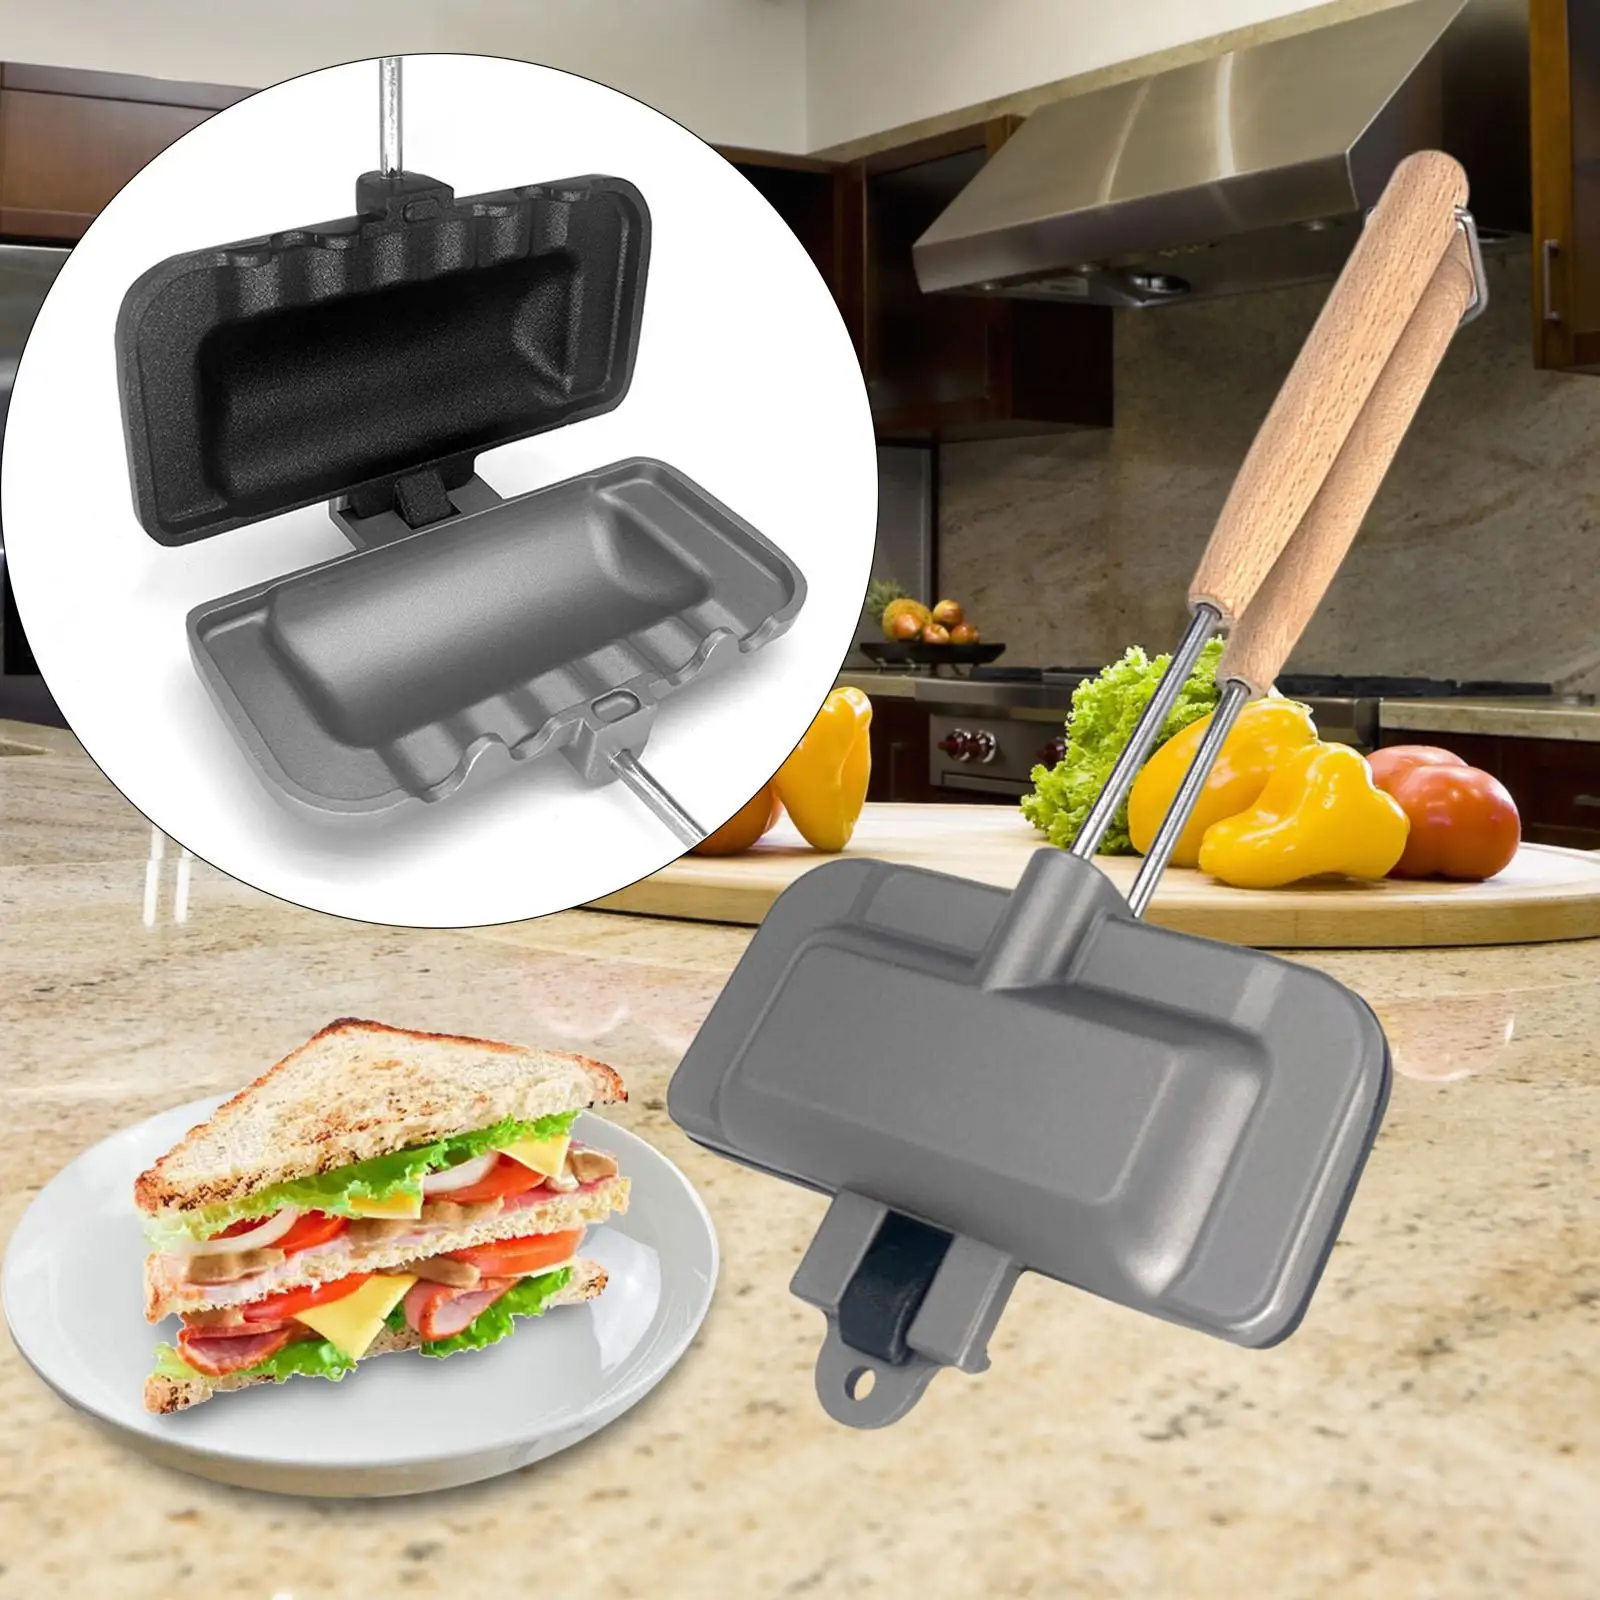 Nonstick Sandwich Pan, Aluminum Frying Pan for Cafe Home Restaurant Dining Room Kitchen